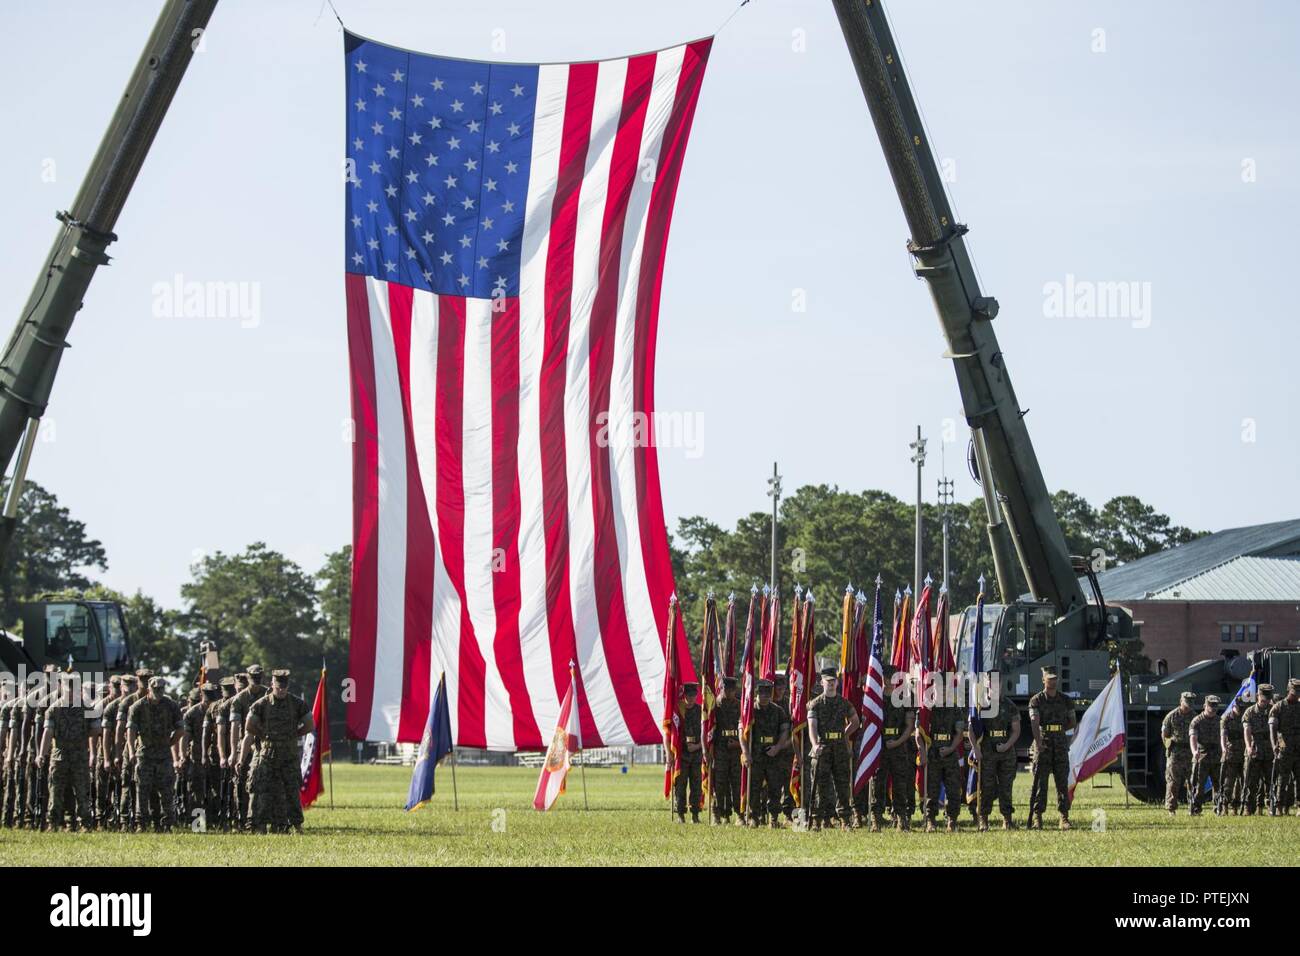 U.S. Marines assigned to II Marine Expeditionary Force (MEF) during the II Marine Expeditionary Force (II MEF) change of command ceremony on Camp Lejeune, N.C., July 14, 2017. During the ceremony, Maj. Gen. Walter L. Miller Jr. relinquished his command as commanding general of II MEF to Lt. Gen. Robert F. Hedelund. Stock Photo